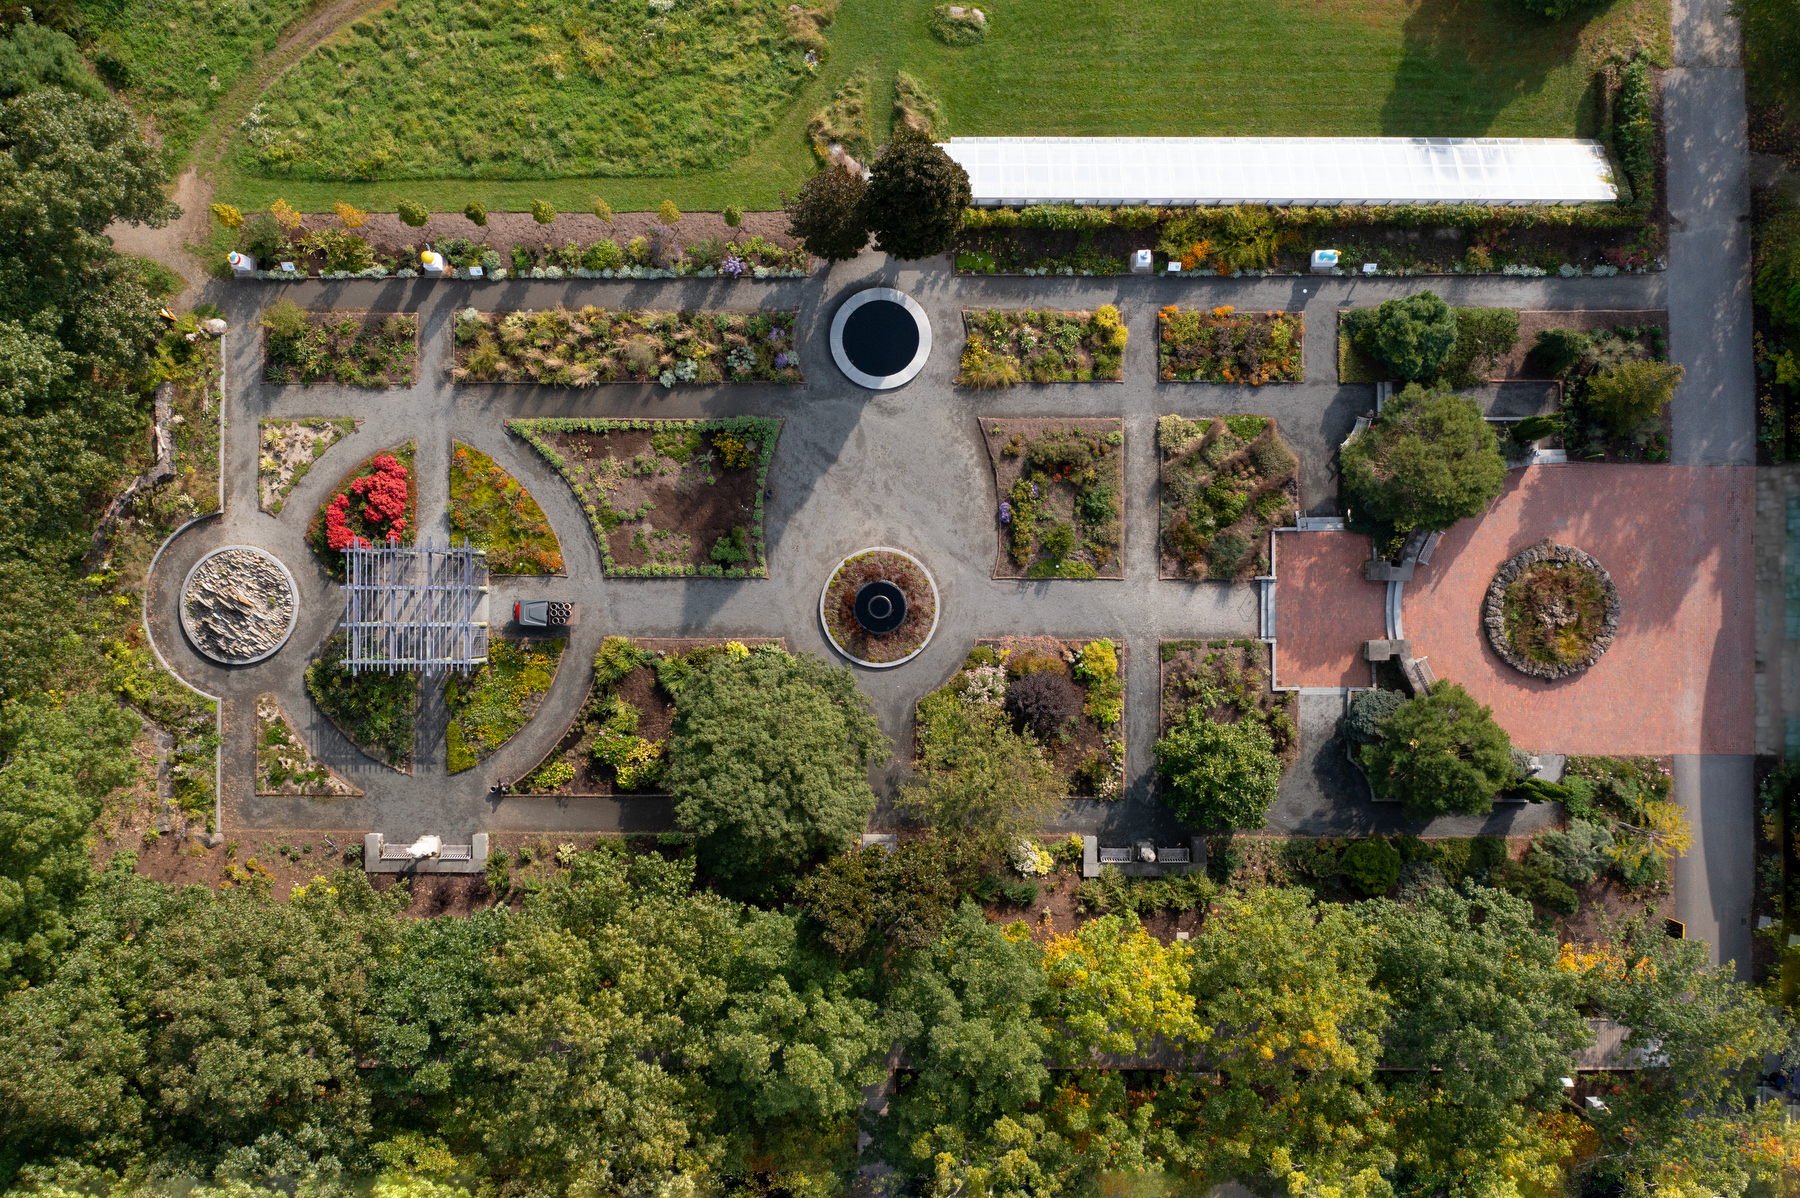 An aerial view of the Garden of Inspiration in early autumn